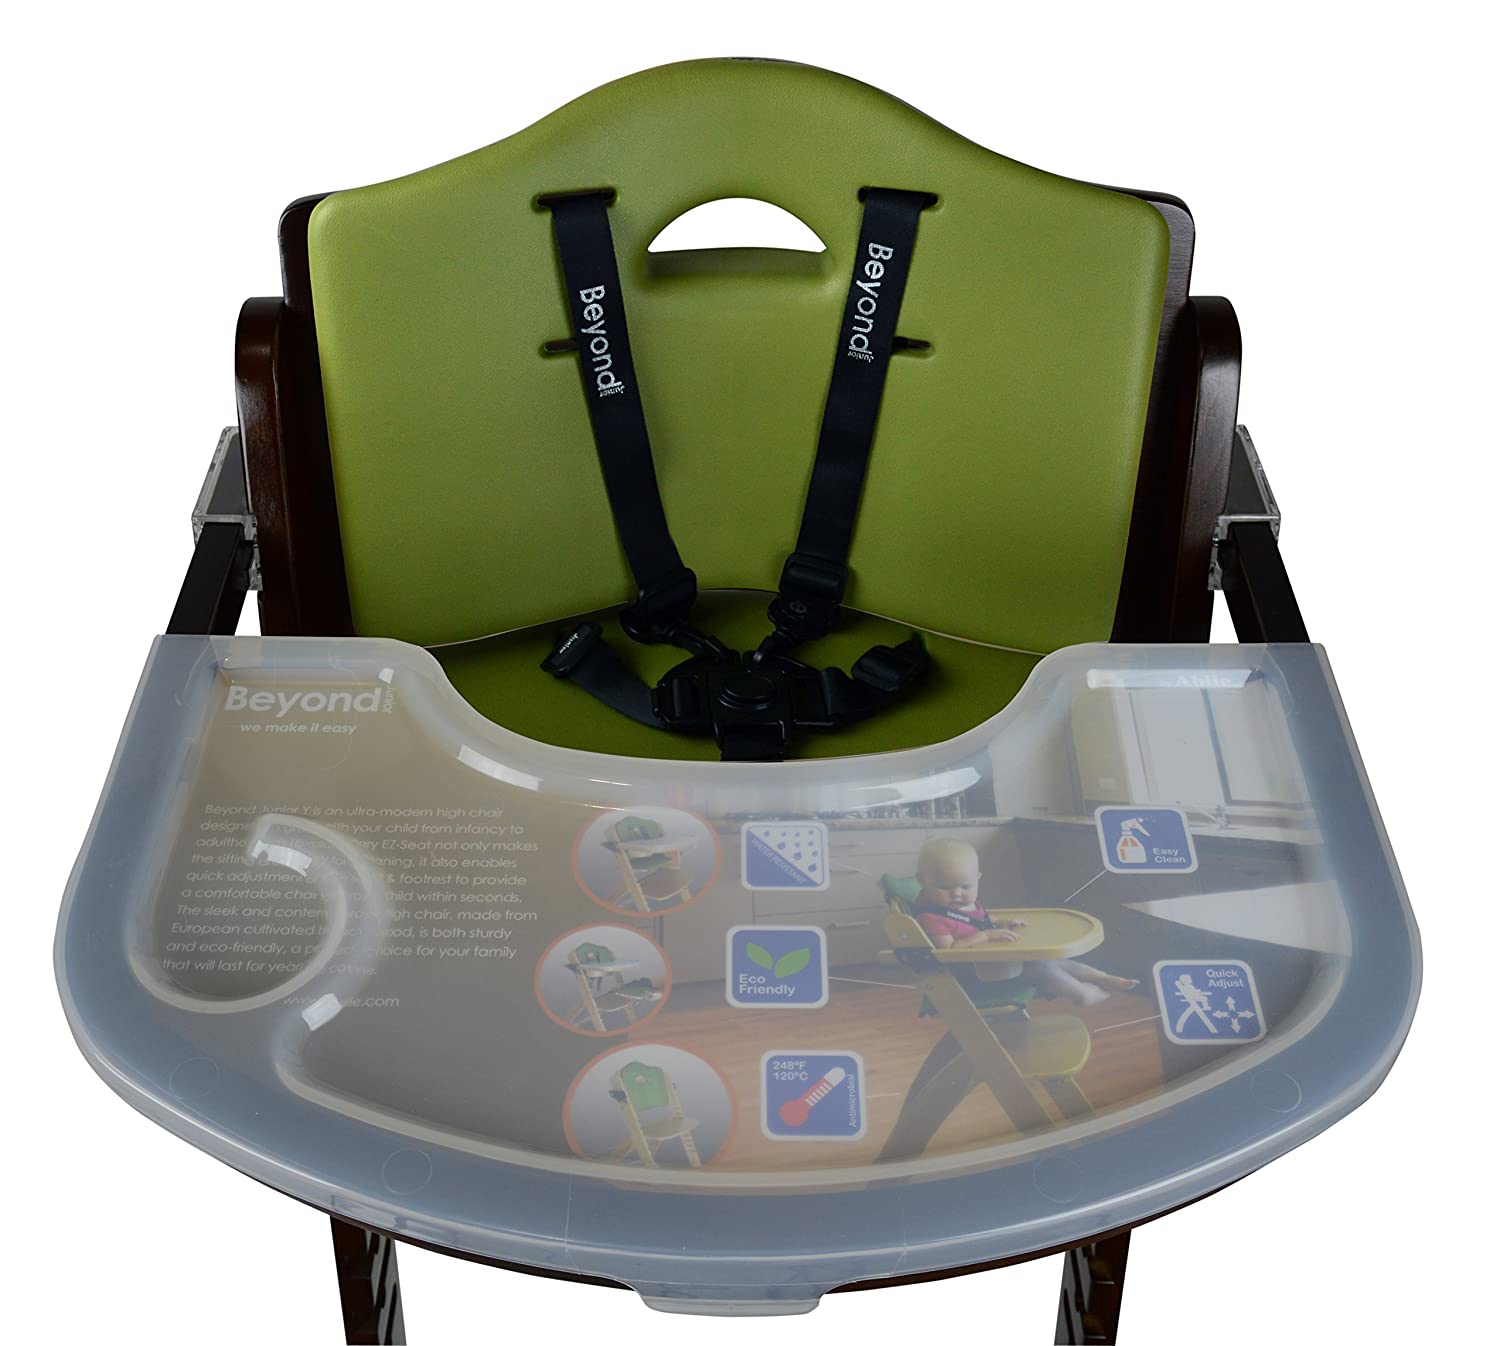 Abiie Beyond Wooden High Chair with Tray. The Perfect Adjustable Baby Highchair Solution (Mahogany Wood - Green Cushion)